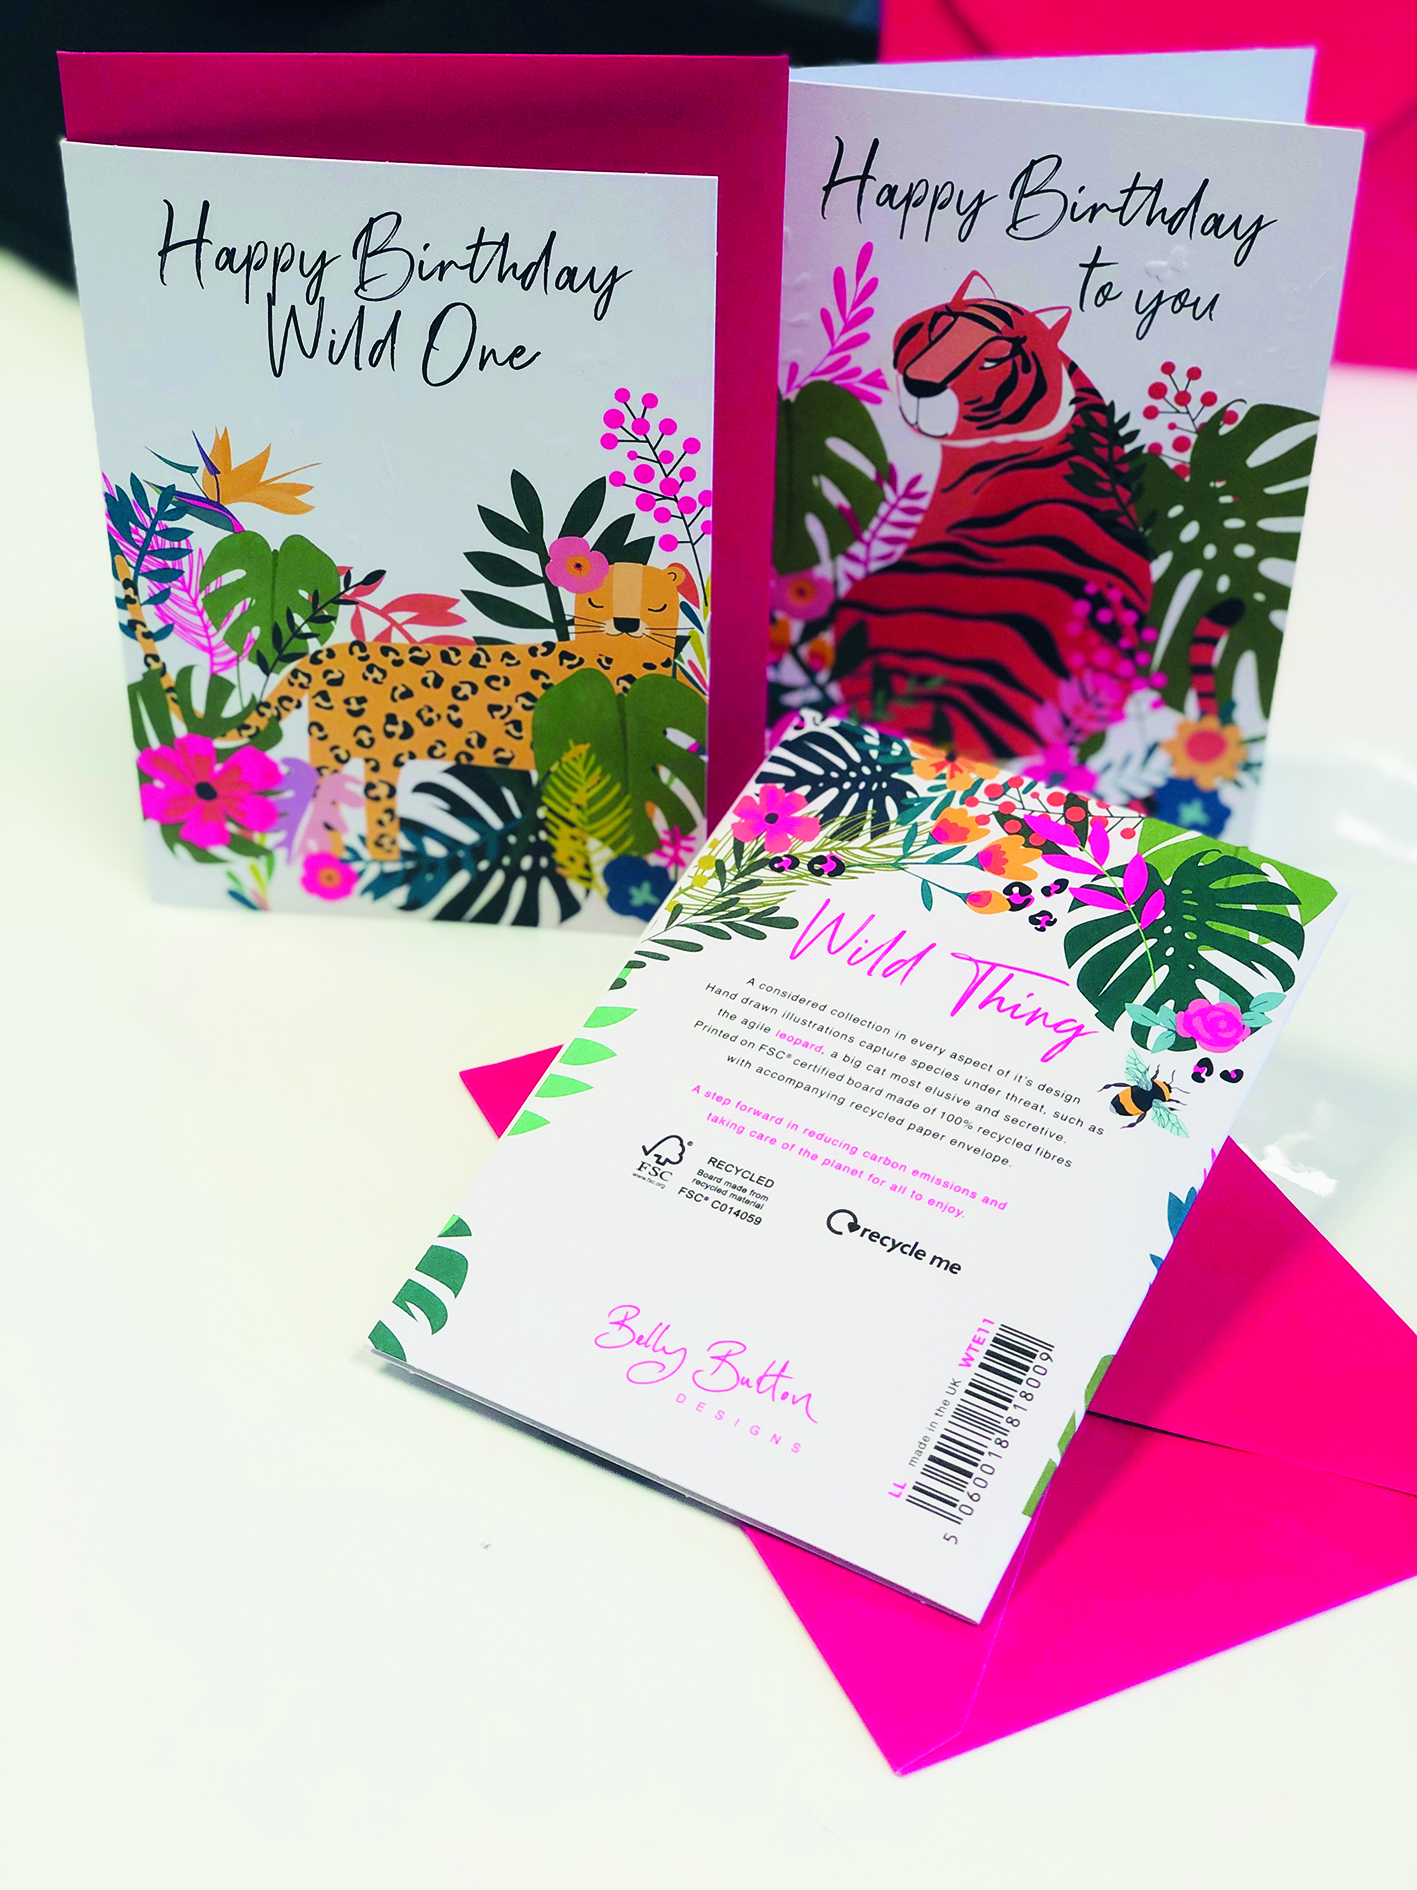 Above: The backs of the cards in Belly Button’s Wild Thing range includes a description about the animal featured on the front that’s under threat. “Big cats empower, whether reflecting our confidence in the fashion prints we wear, or the strength of motherhood and nurturing symbolised, we are hugely attached to that,” suggests Rachel Hare, md and creative director of Belly Button Designs. 